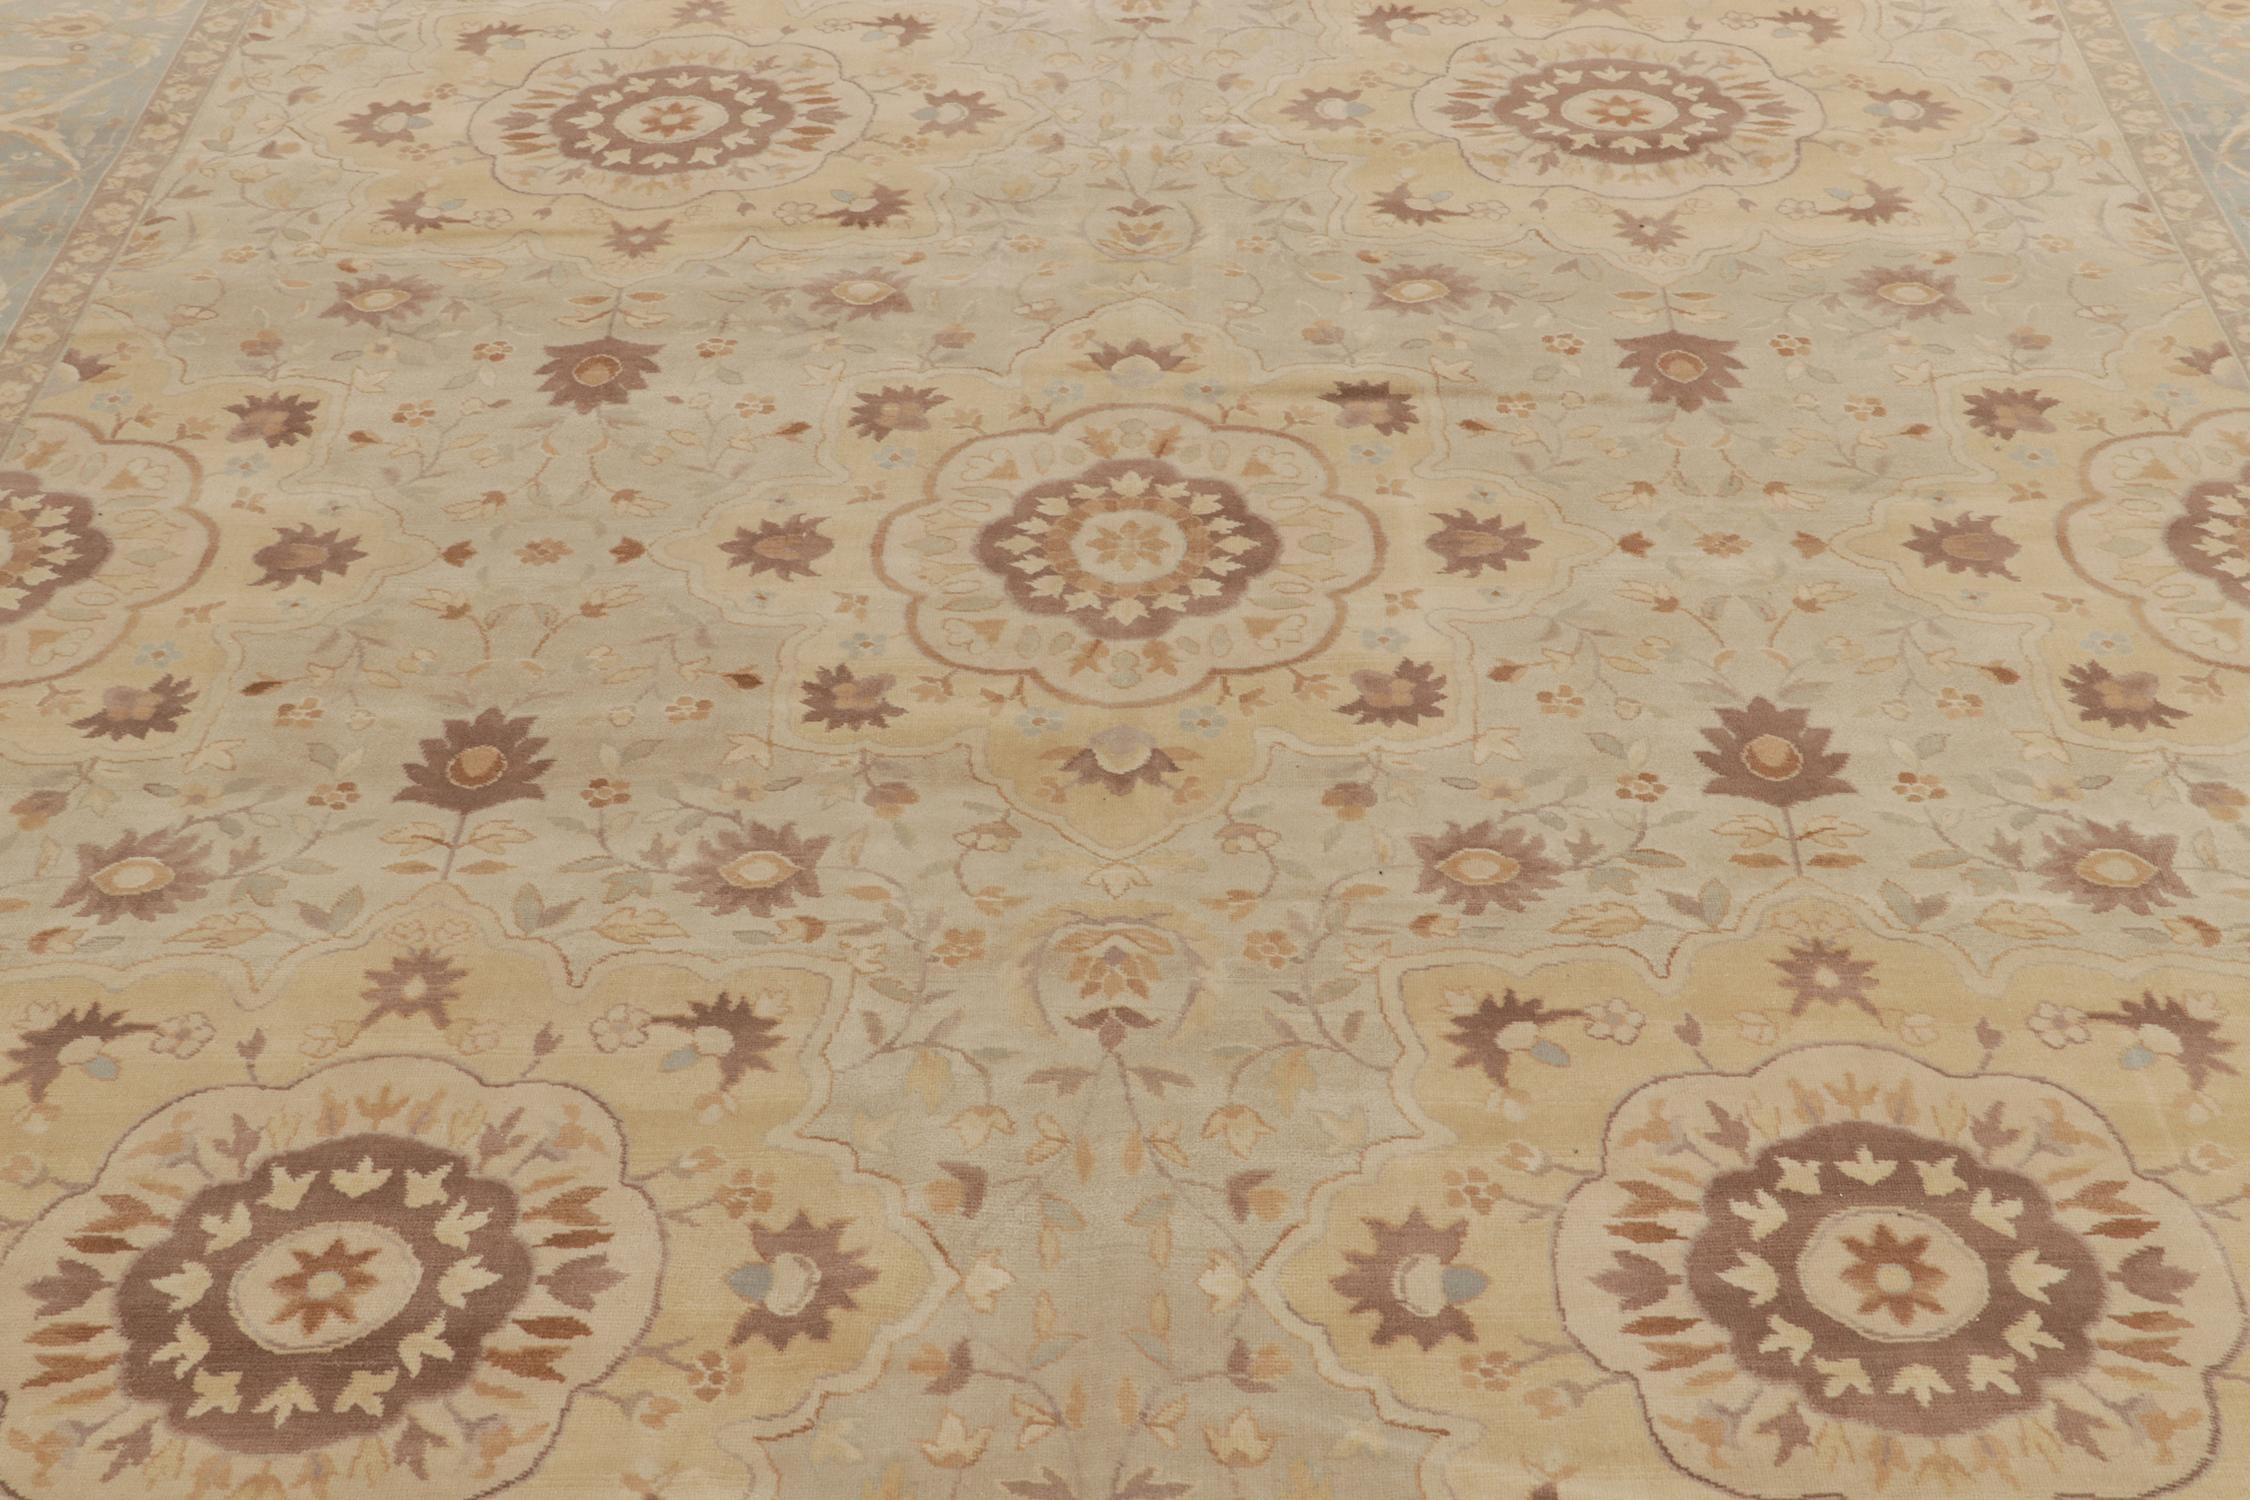 Rug & Kilim's Sultanabad Style Rug in Beige-Brown & Blue Floral Pattern In New Condition For Sale In Long Island City, NY